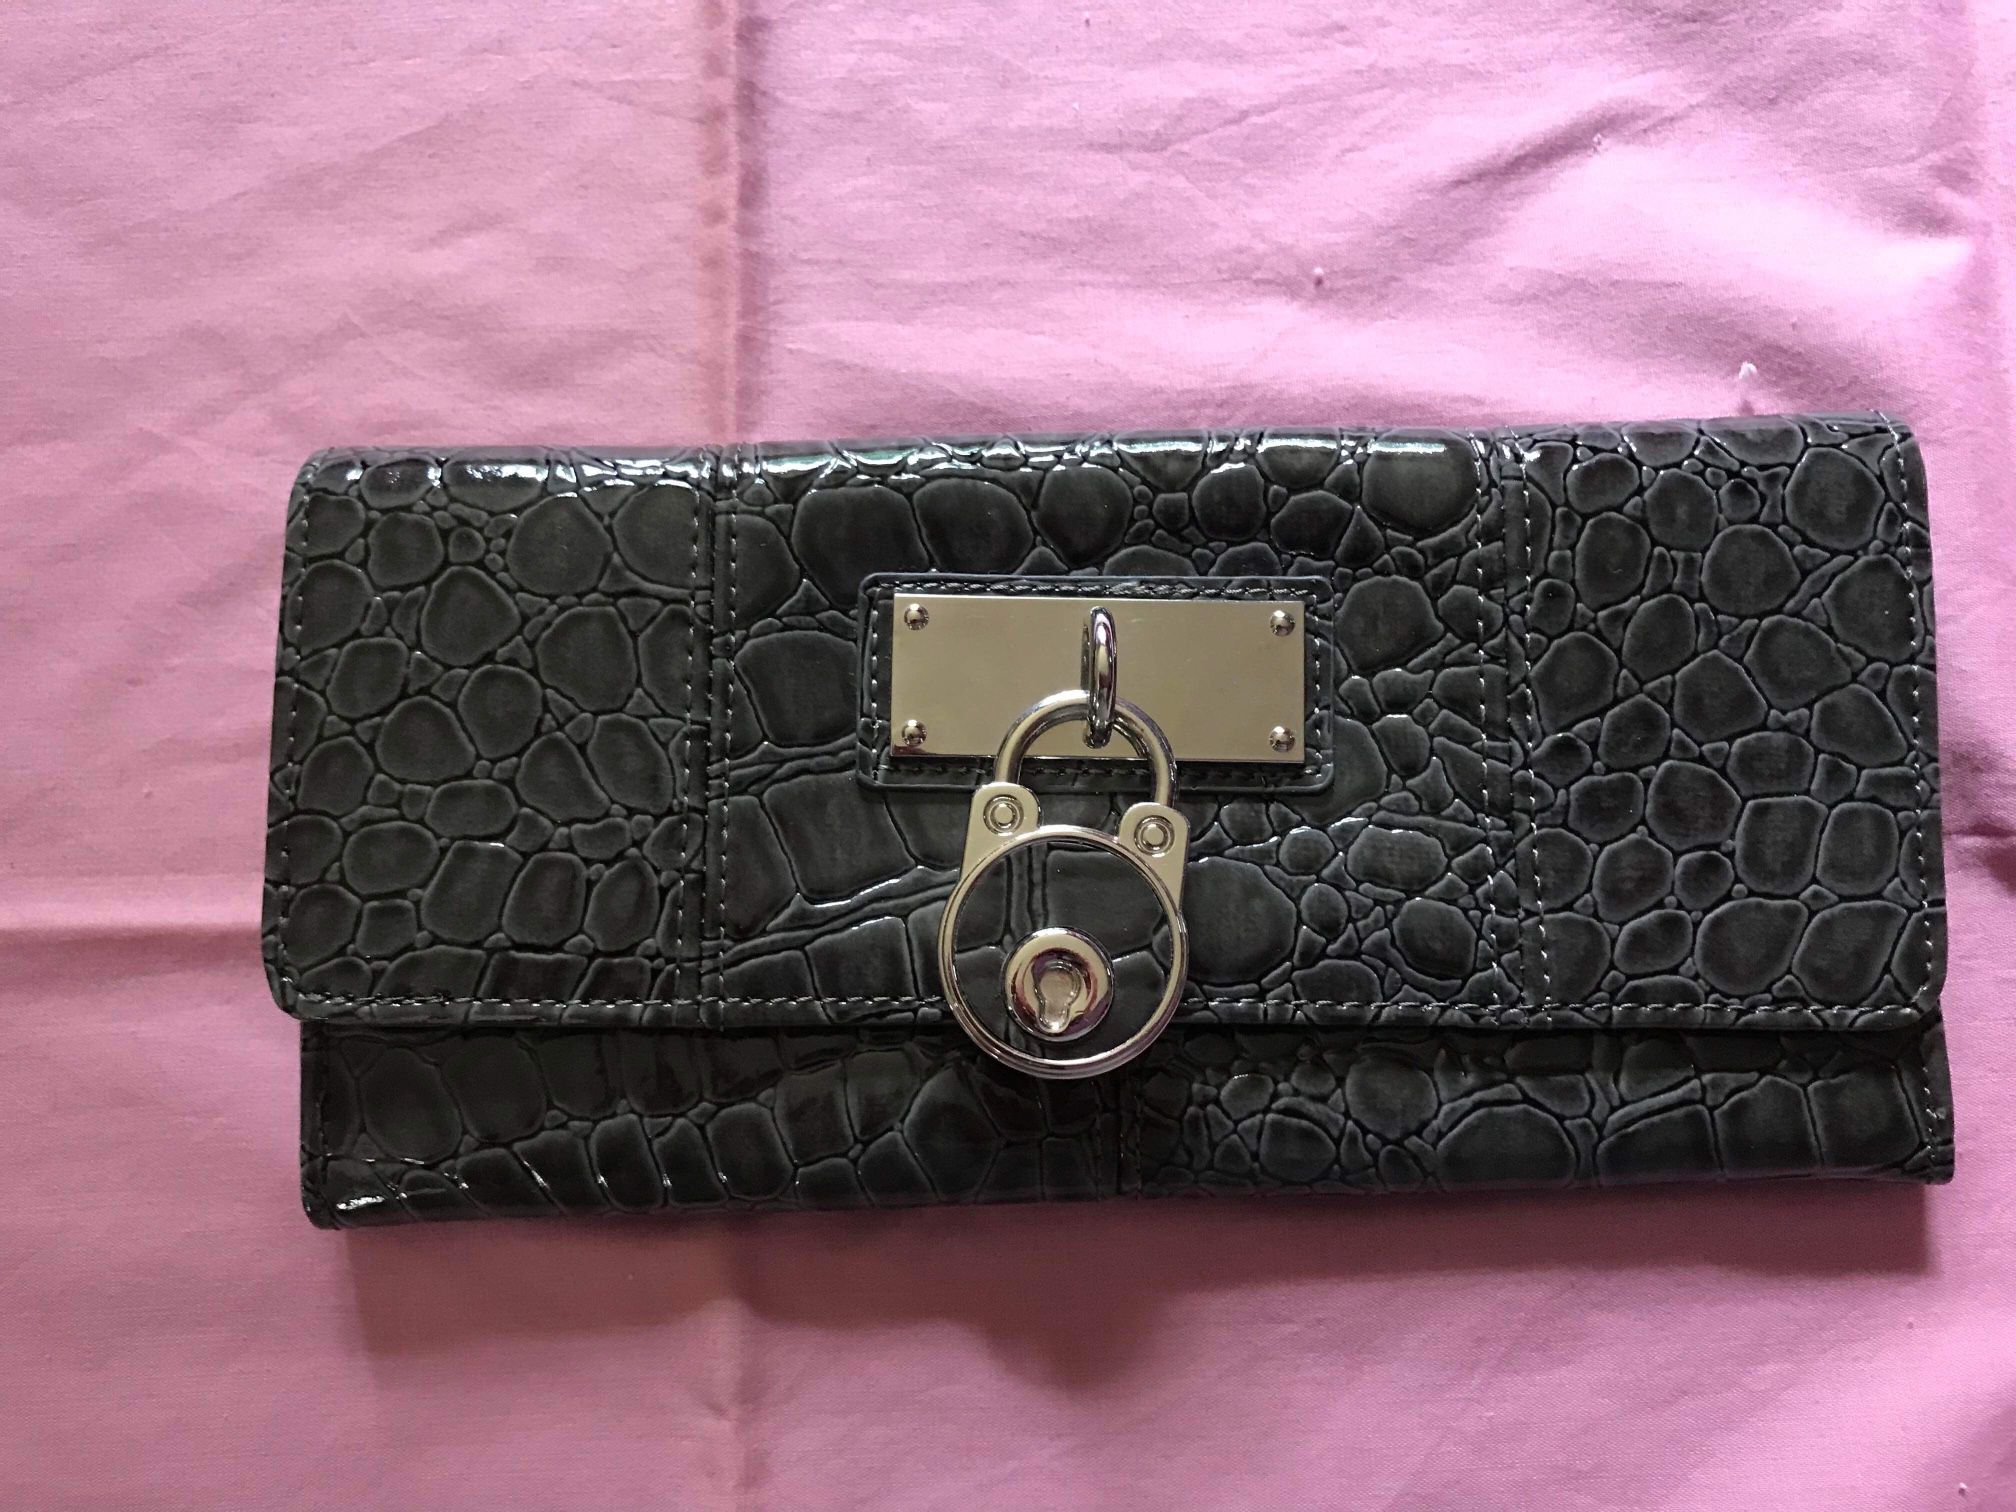 NY&C (NEW YORK & COMPANY) GRAY FAUX ALLIGATOR WALLET WITH FRONT LOCK DECORATIVE DETAIL ~ NEW WITH TAG